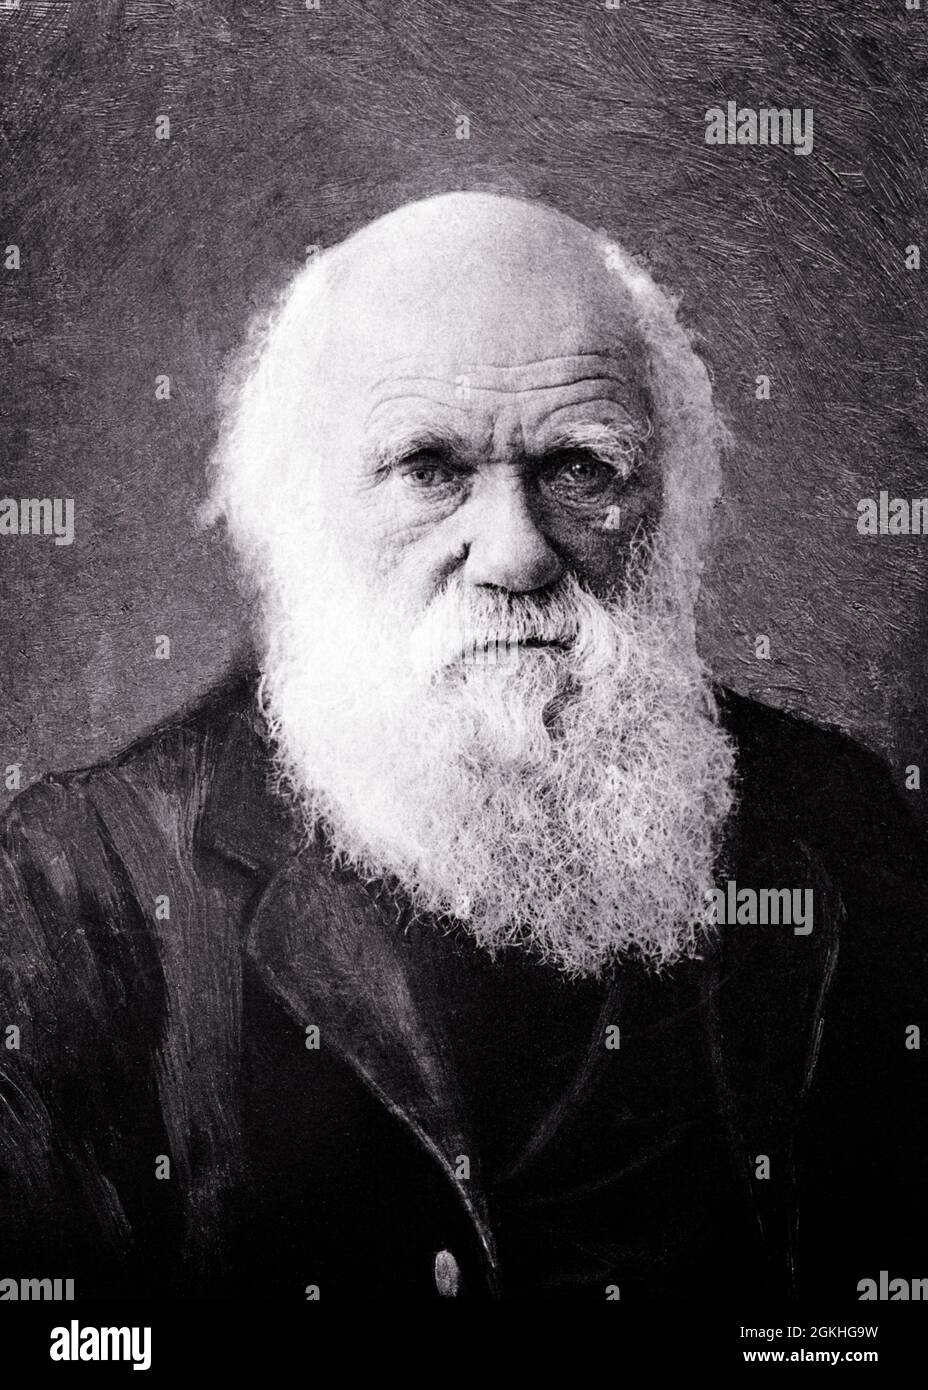 1880s PORTRAIT OF ELDERLY CHARLES DARWIN ENGLISH NATURALIST GEOLOGIST AND BIOLOGIST KNOWN FOR THEORIES OF SCIENCE OF EVOLUTION - q64177 CPC001 HARS KNOWLEDGE LEADERSHIP POWERFUL PRIDE AUTHORITY OCCUPATIONS CONCEPTUAL 1880s THEORY BIOLOGIST ELDERLY MAN CHARLES GEOLOGIST IDEAS PRECISION WILDLIFE BLACK AND WHITE KNOWN NATURALIST OLD FASHIONED Stock Photo